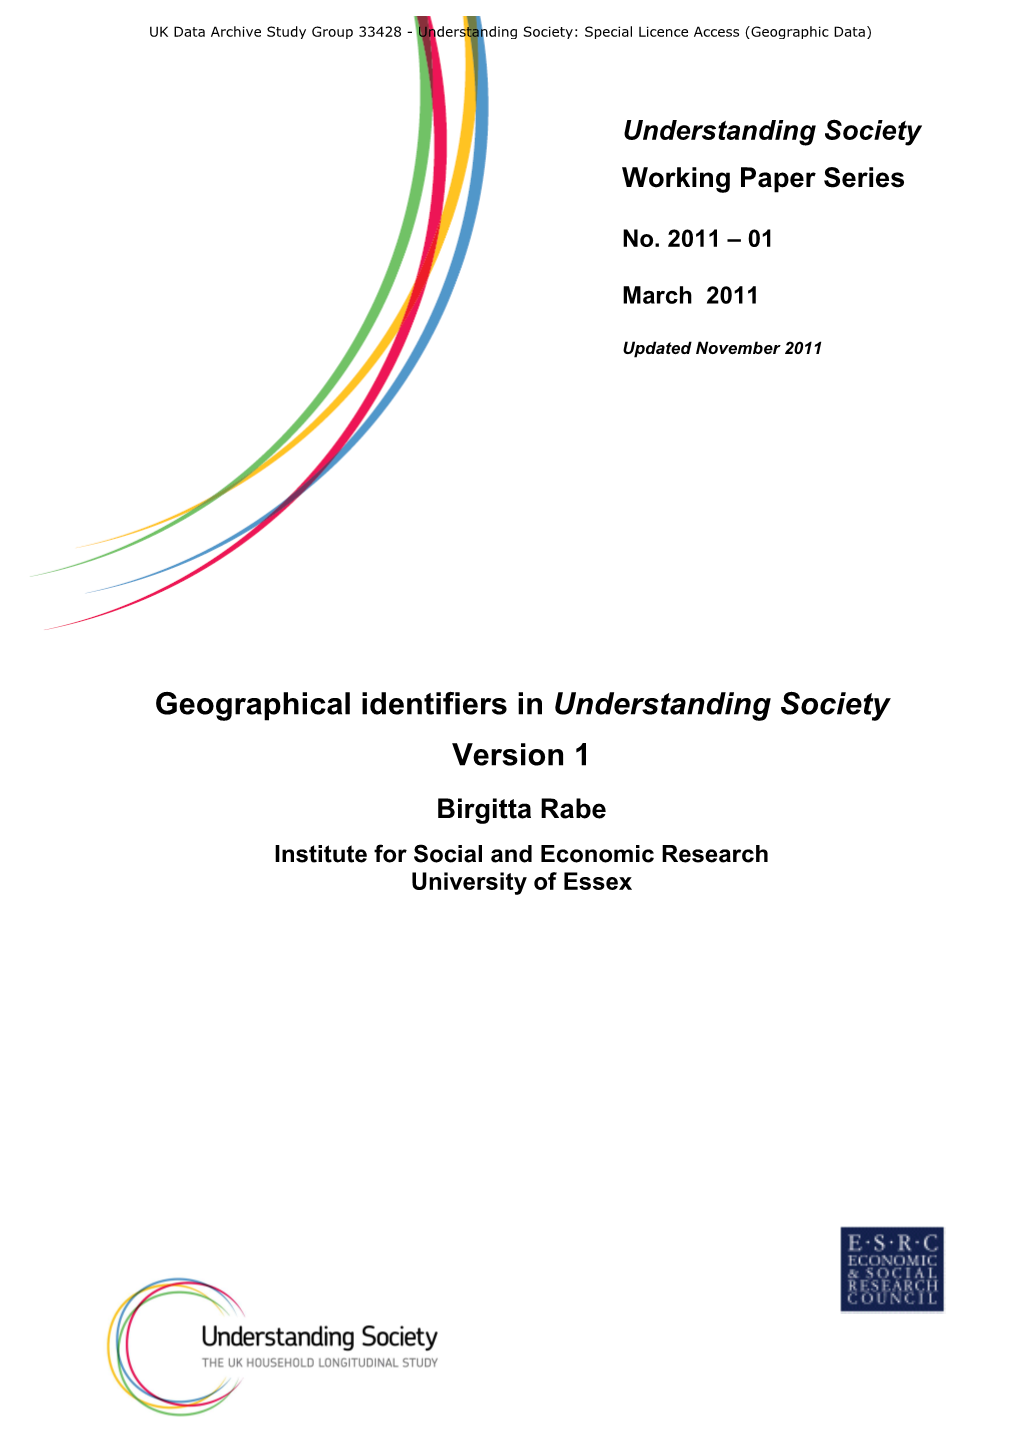 Geographical Identifiers in Understanding Society Version 1 Birgitta Rabe Institute for Social and Economic Research University of Essex